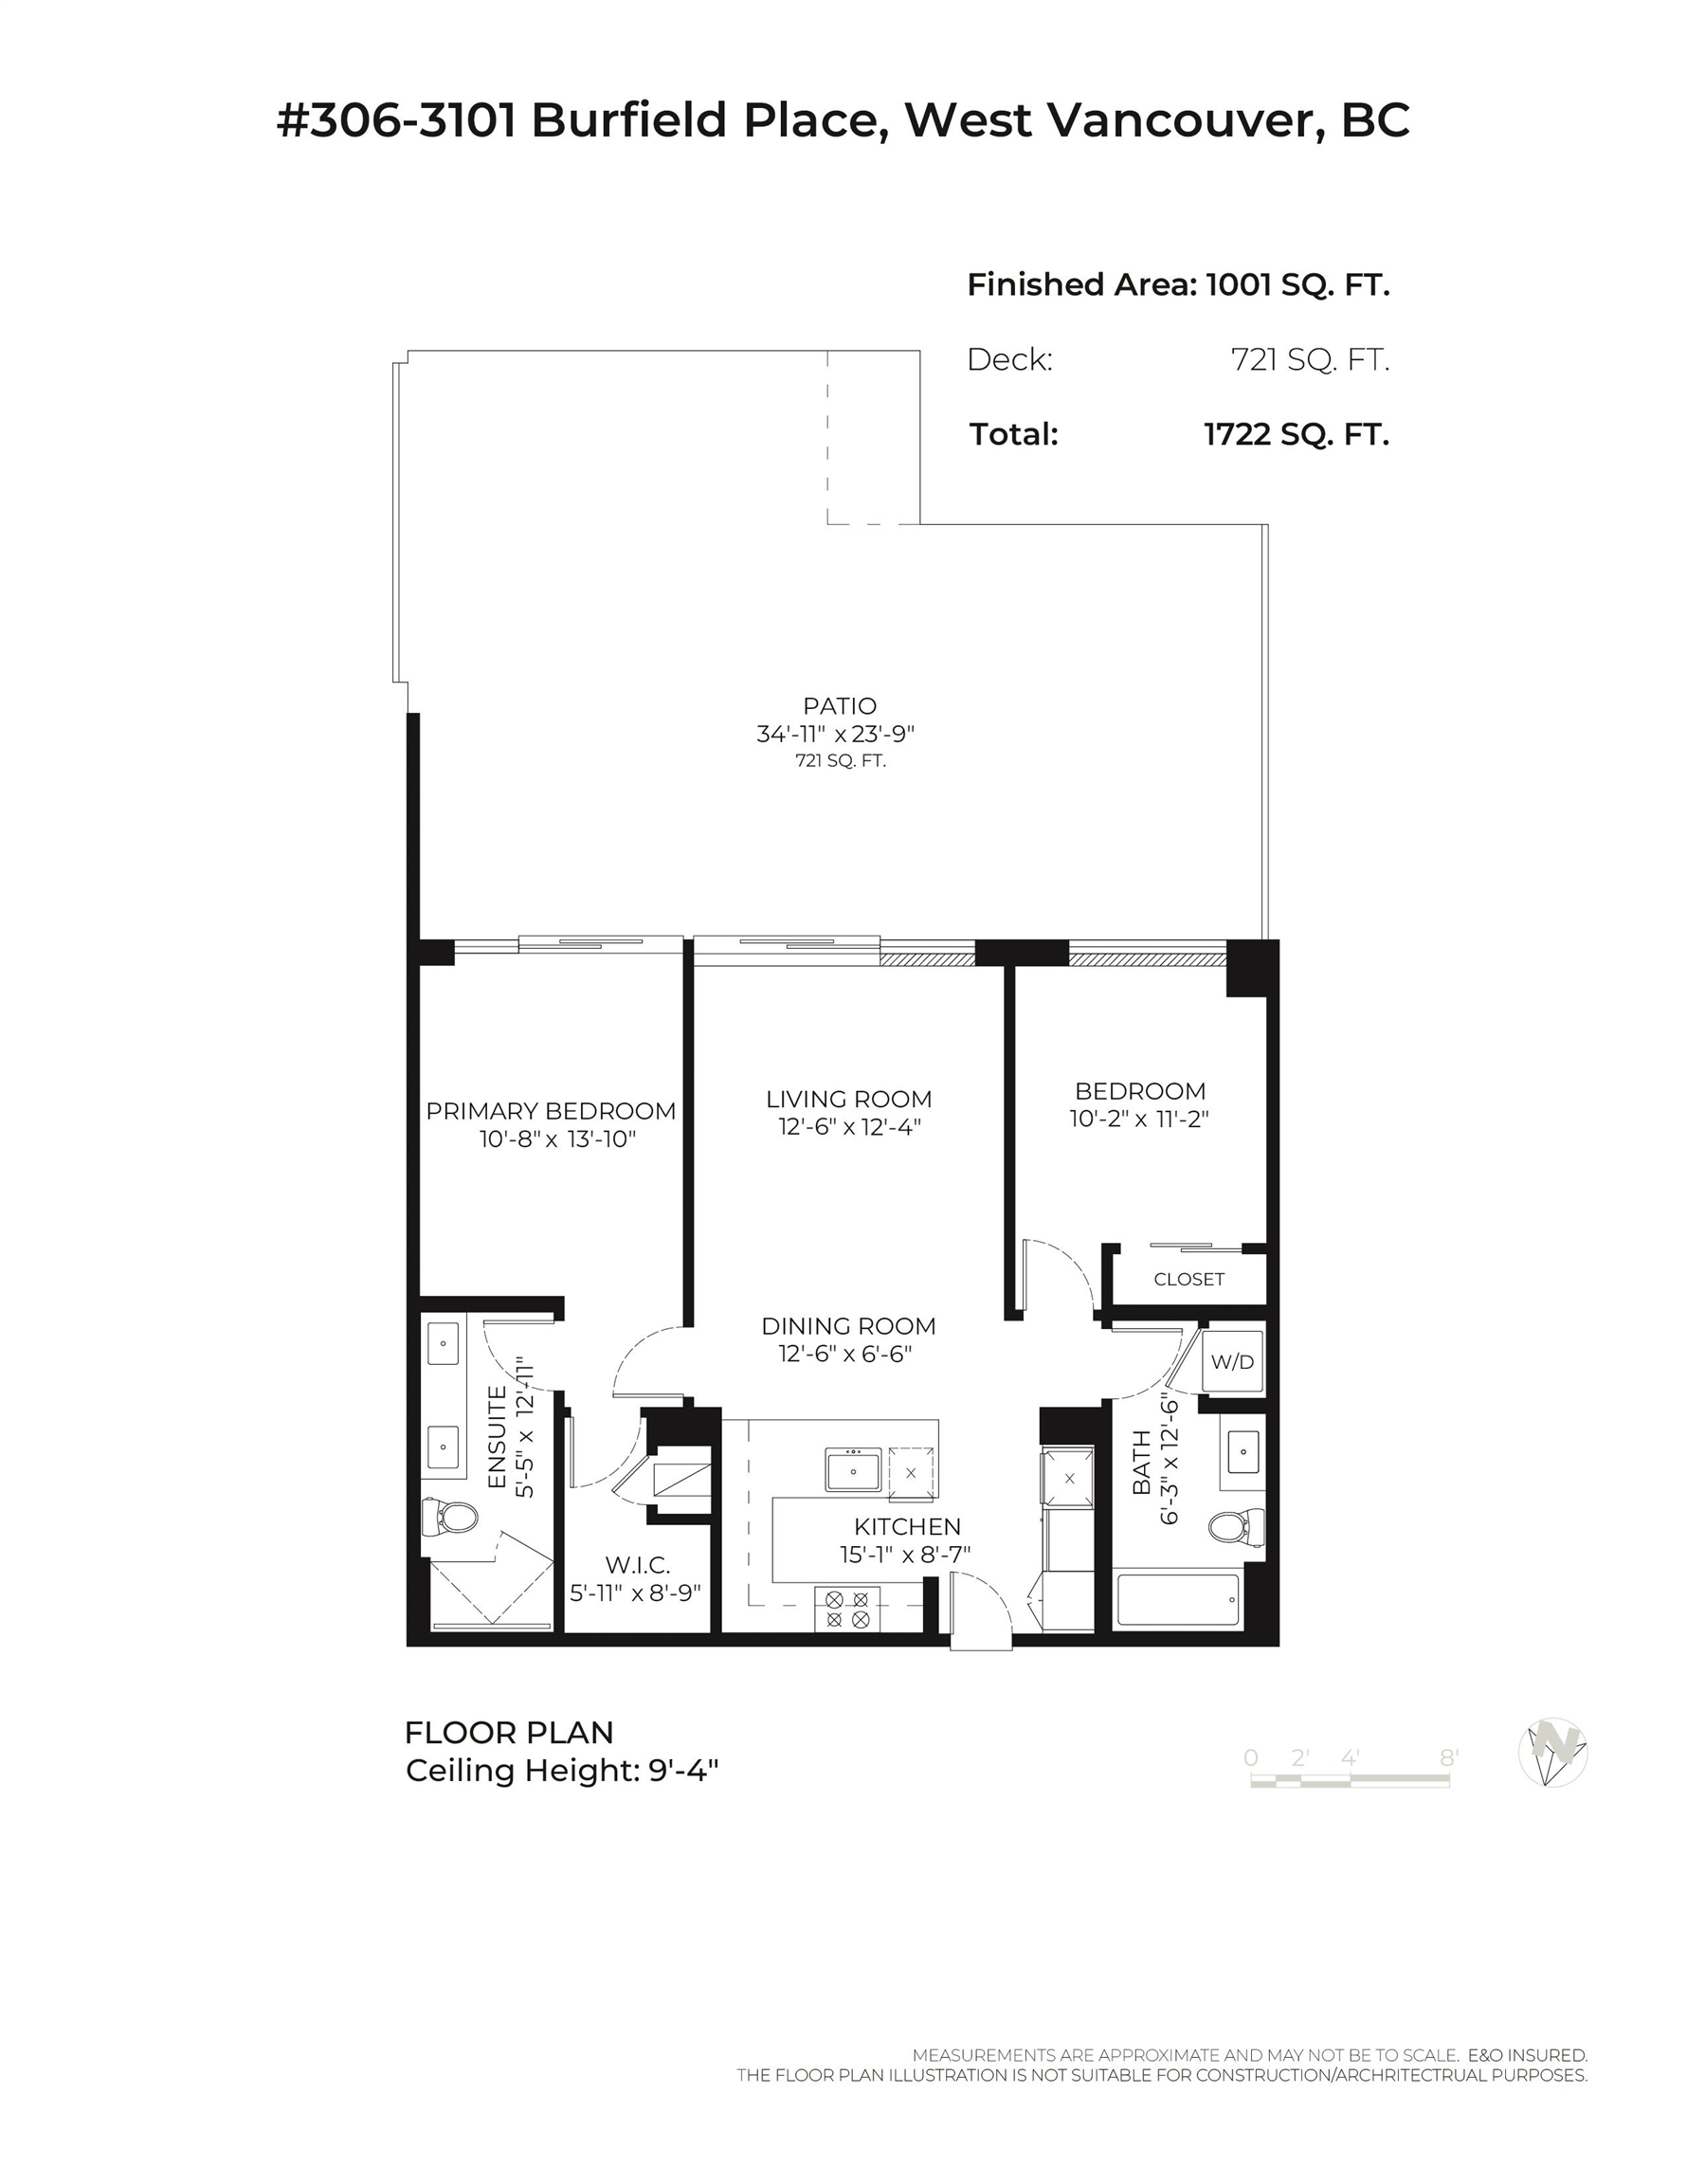 Listing image of 306 3101 BURFIELD PLACE